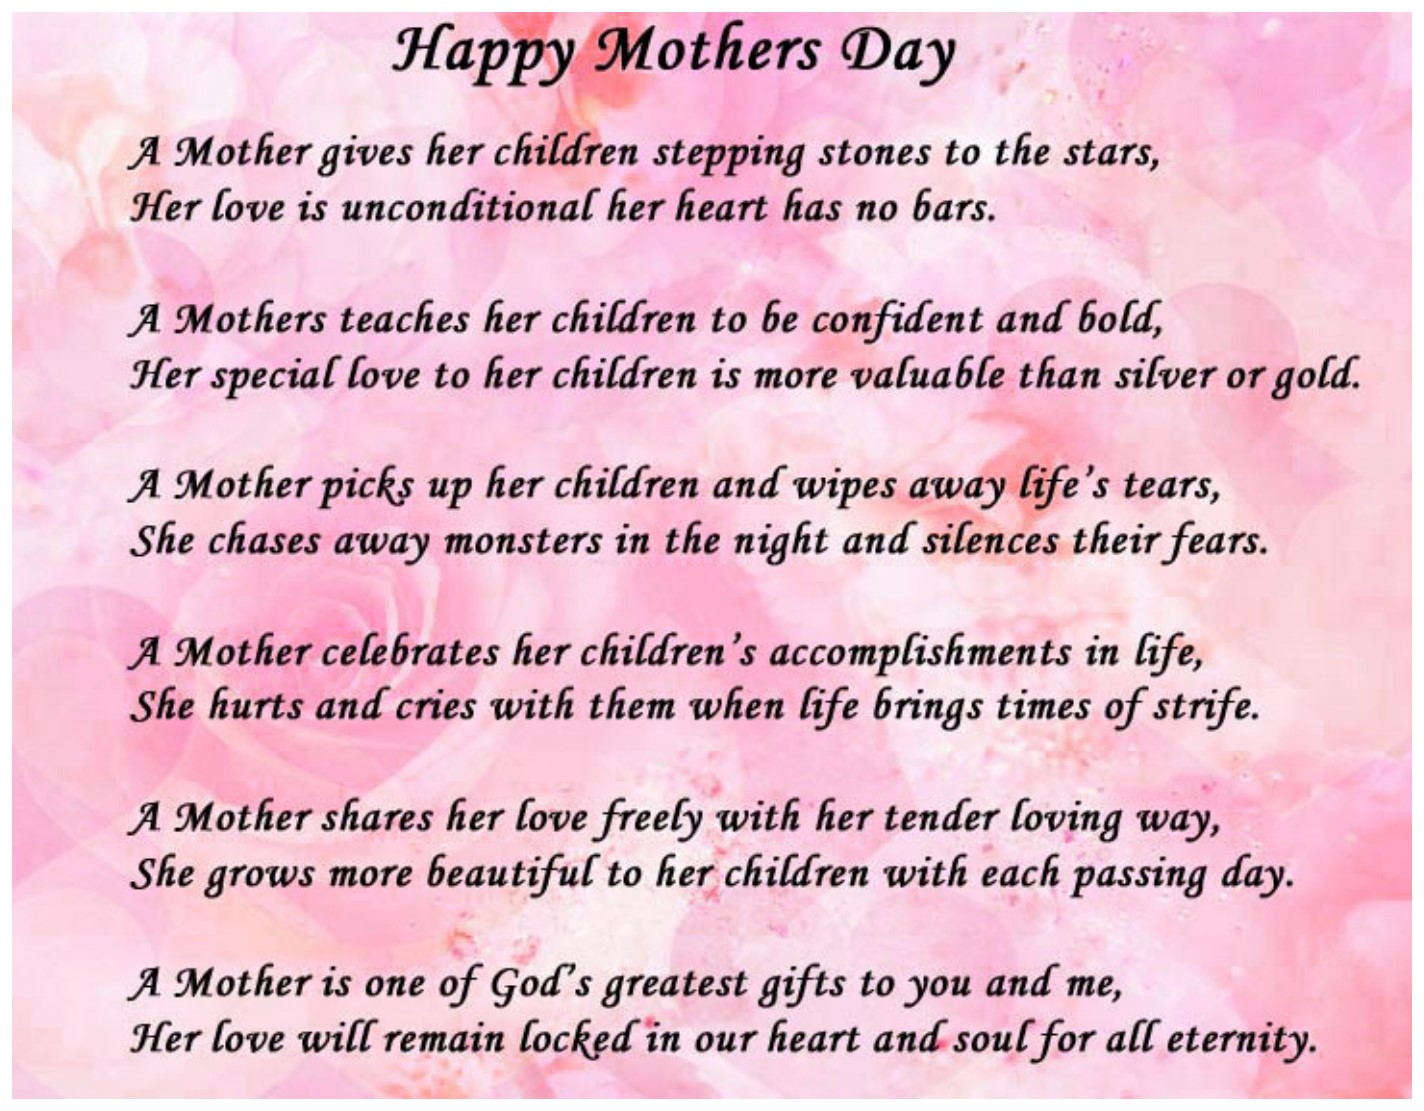 mother-s-day-2021-quotes-when-is-mothering-sunday-2021-why-is